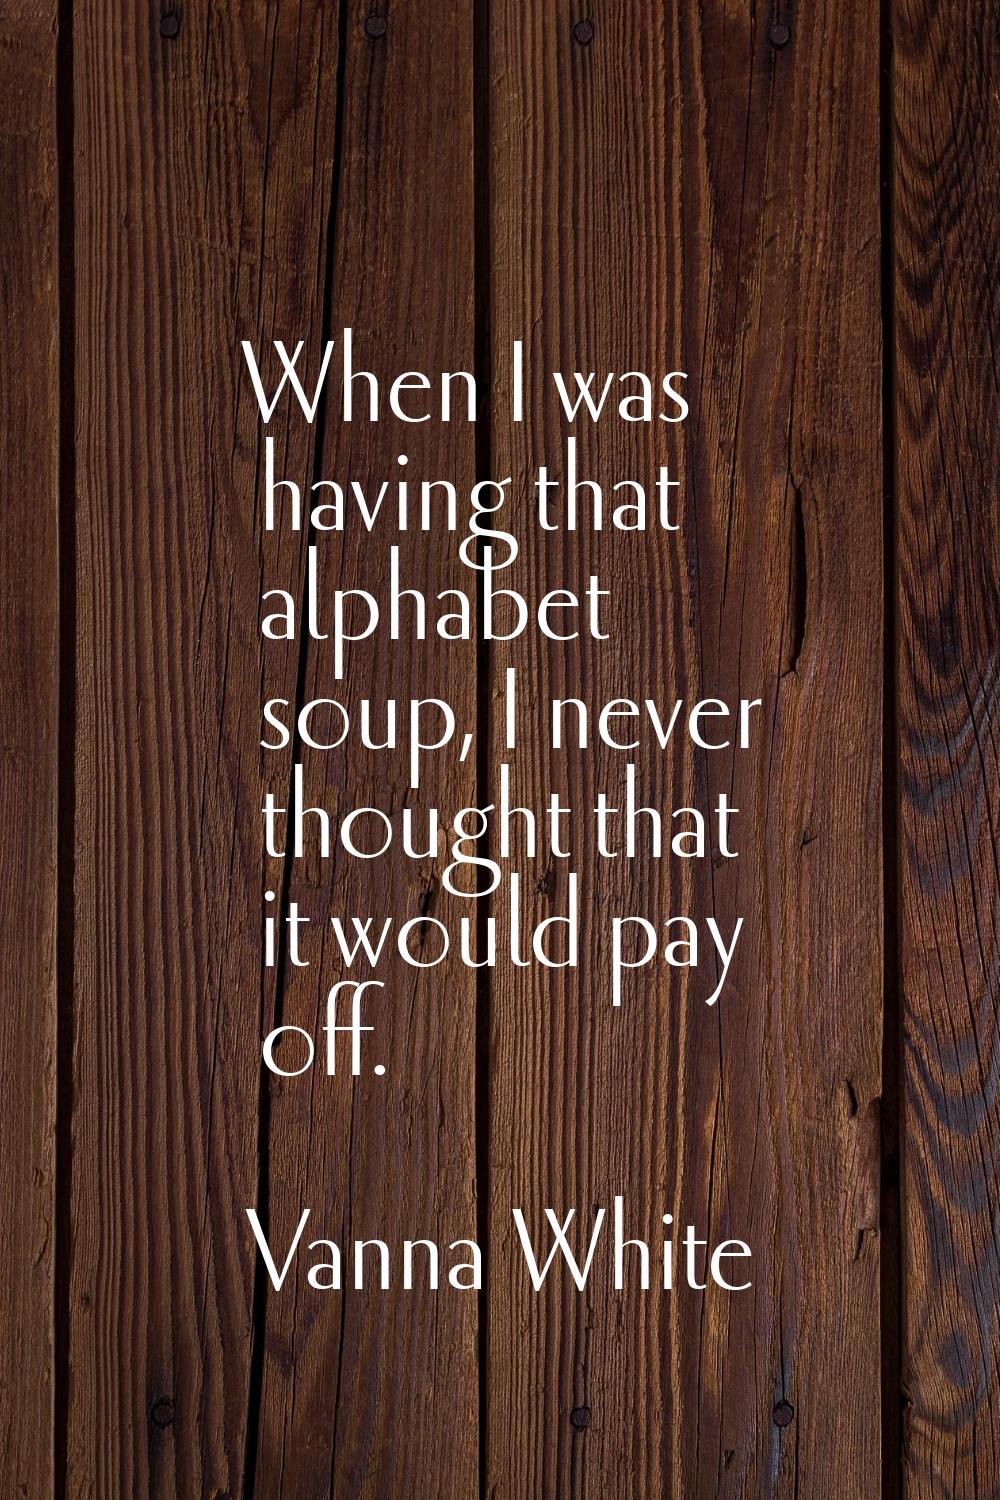 When I was having that alphabet soup, I never thought that it would pay off.